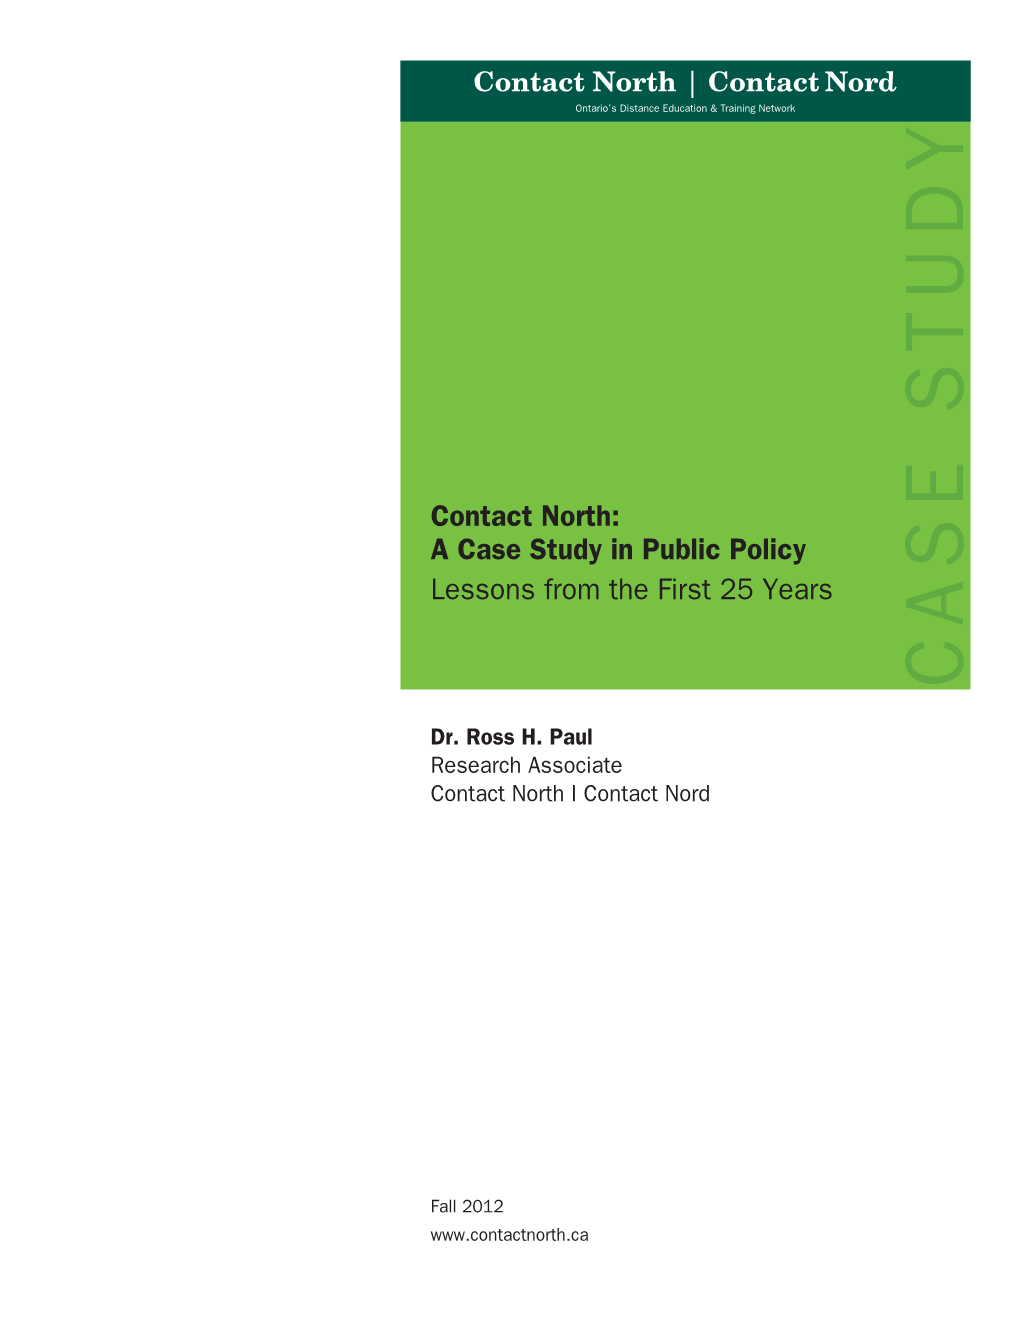 Contact North: a Case Study in Public Policy, Lessons